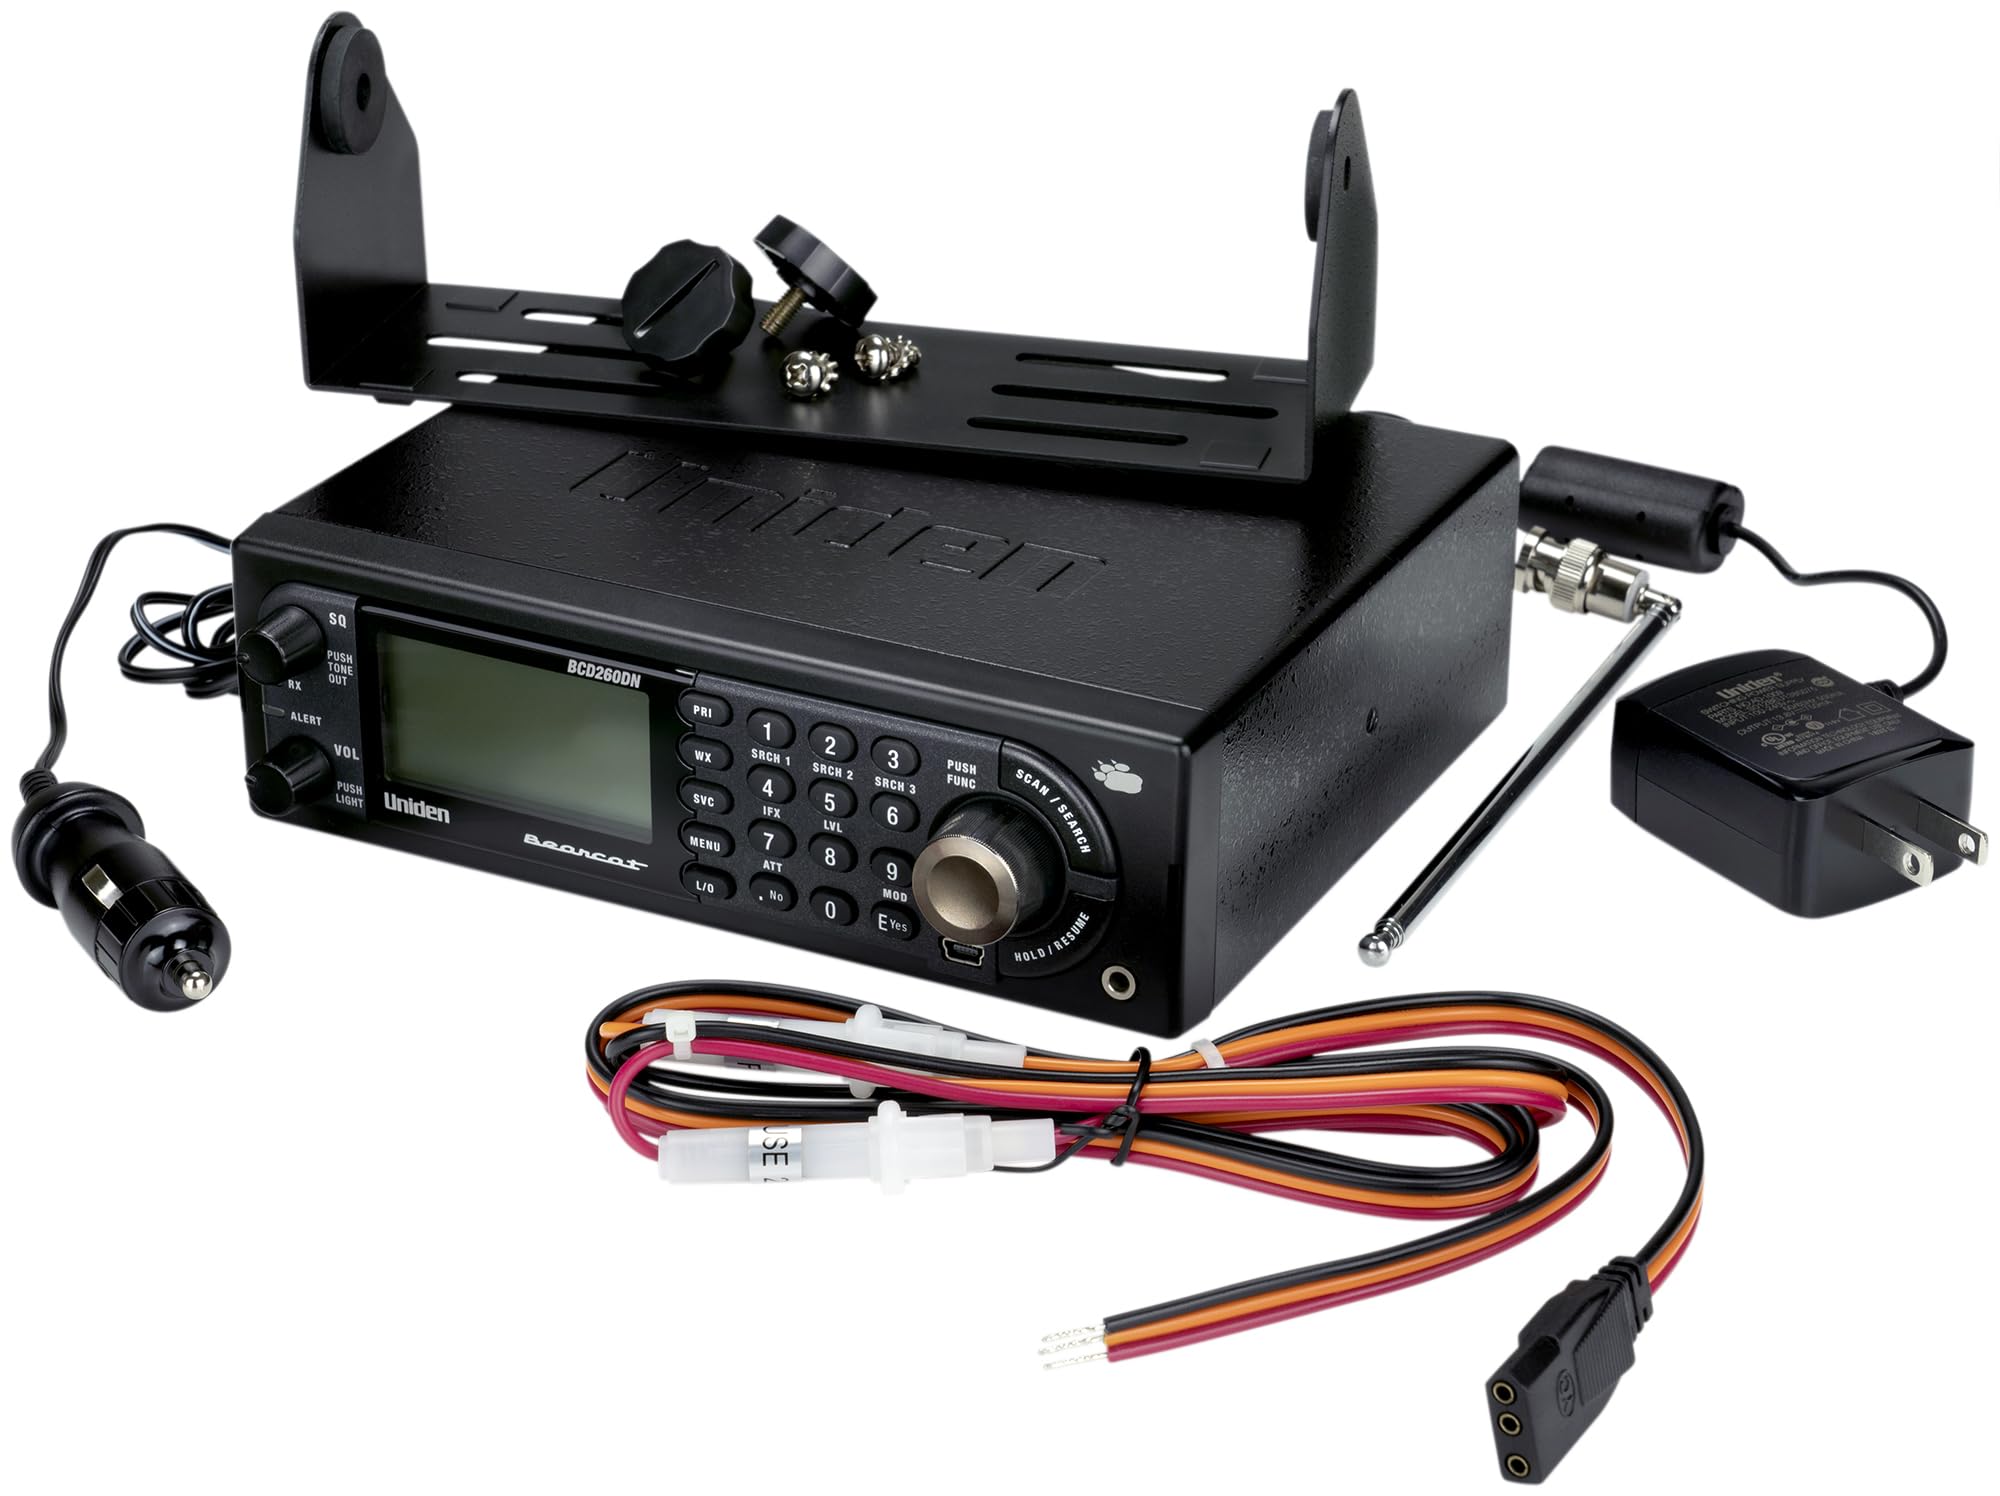 Uniden Bearcat BCD260DN Base/Mobile Digital Scanner, Performance Features, Band Scope Rapid System/Channel Number Tagging, Narrowband Reception, Search Features to Detect Signals Faster Than Ever